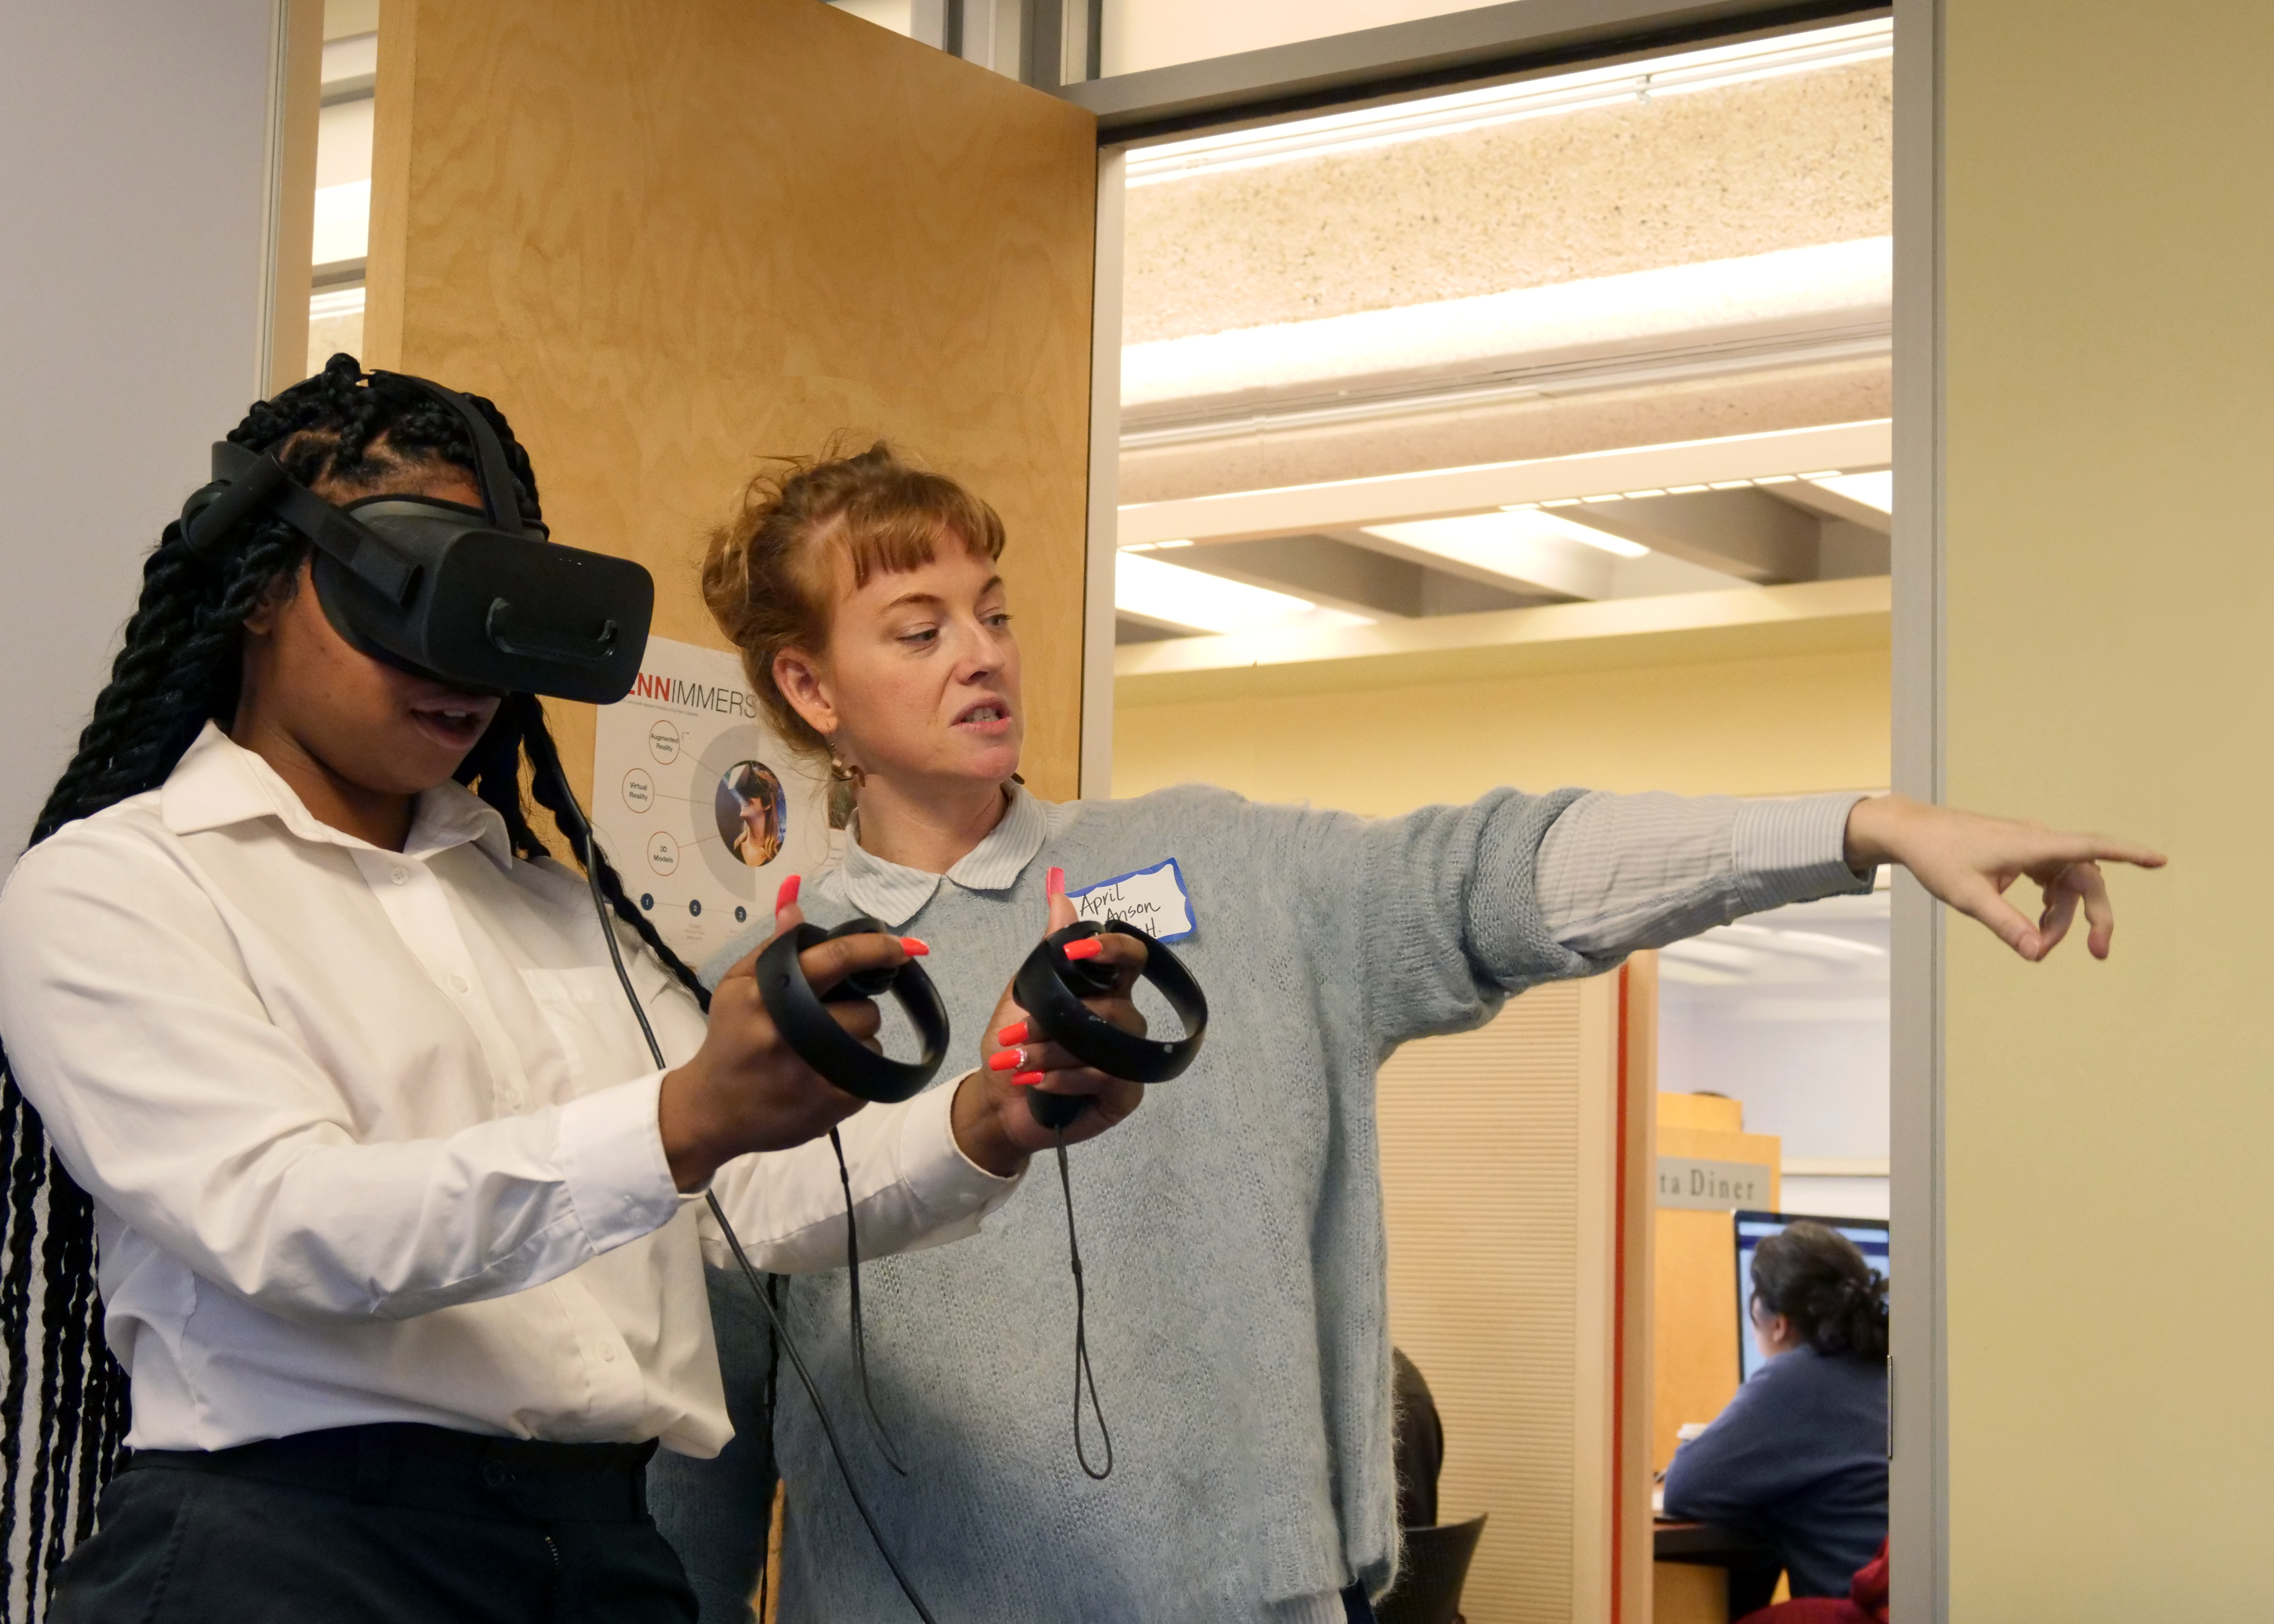 April Anson shows a participant how to use VR controls